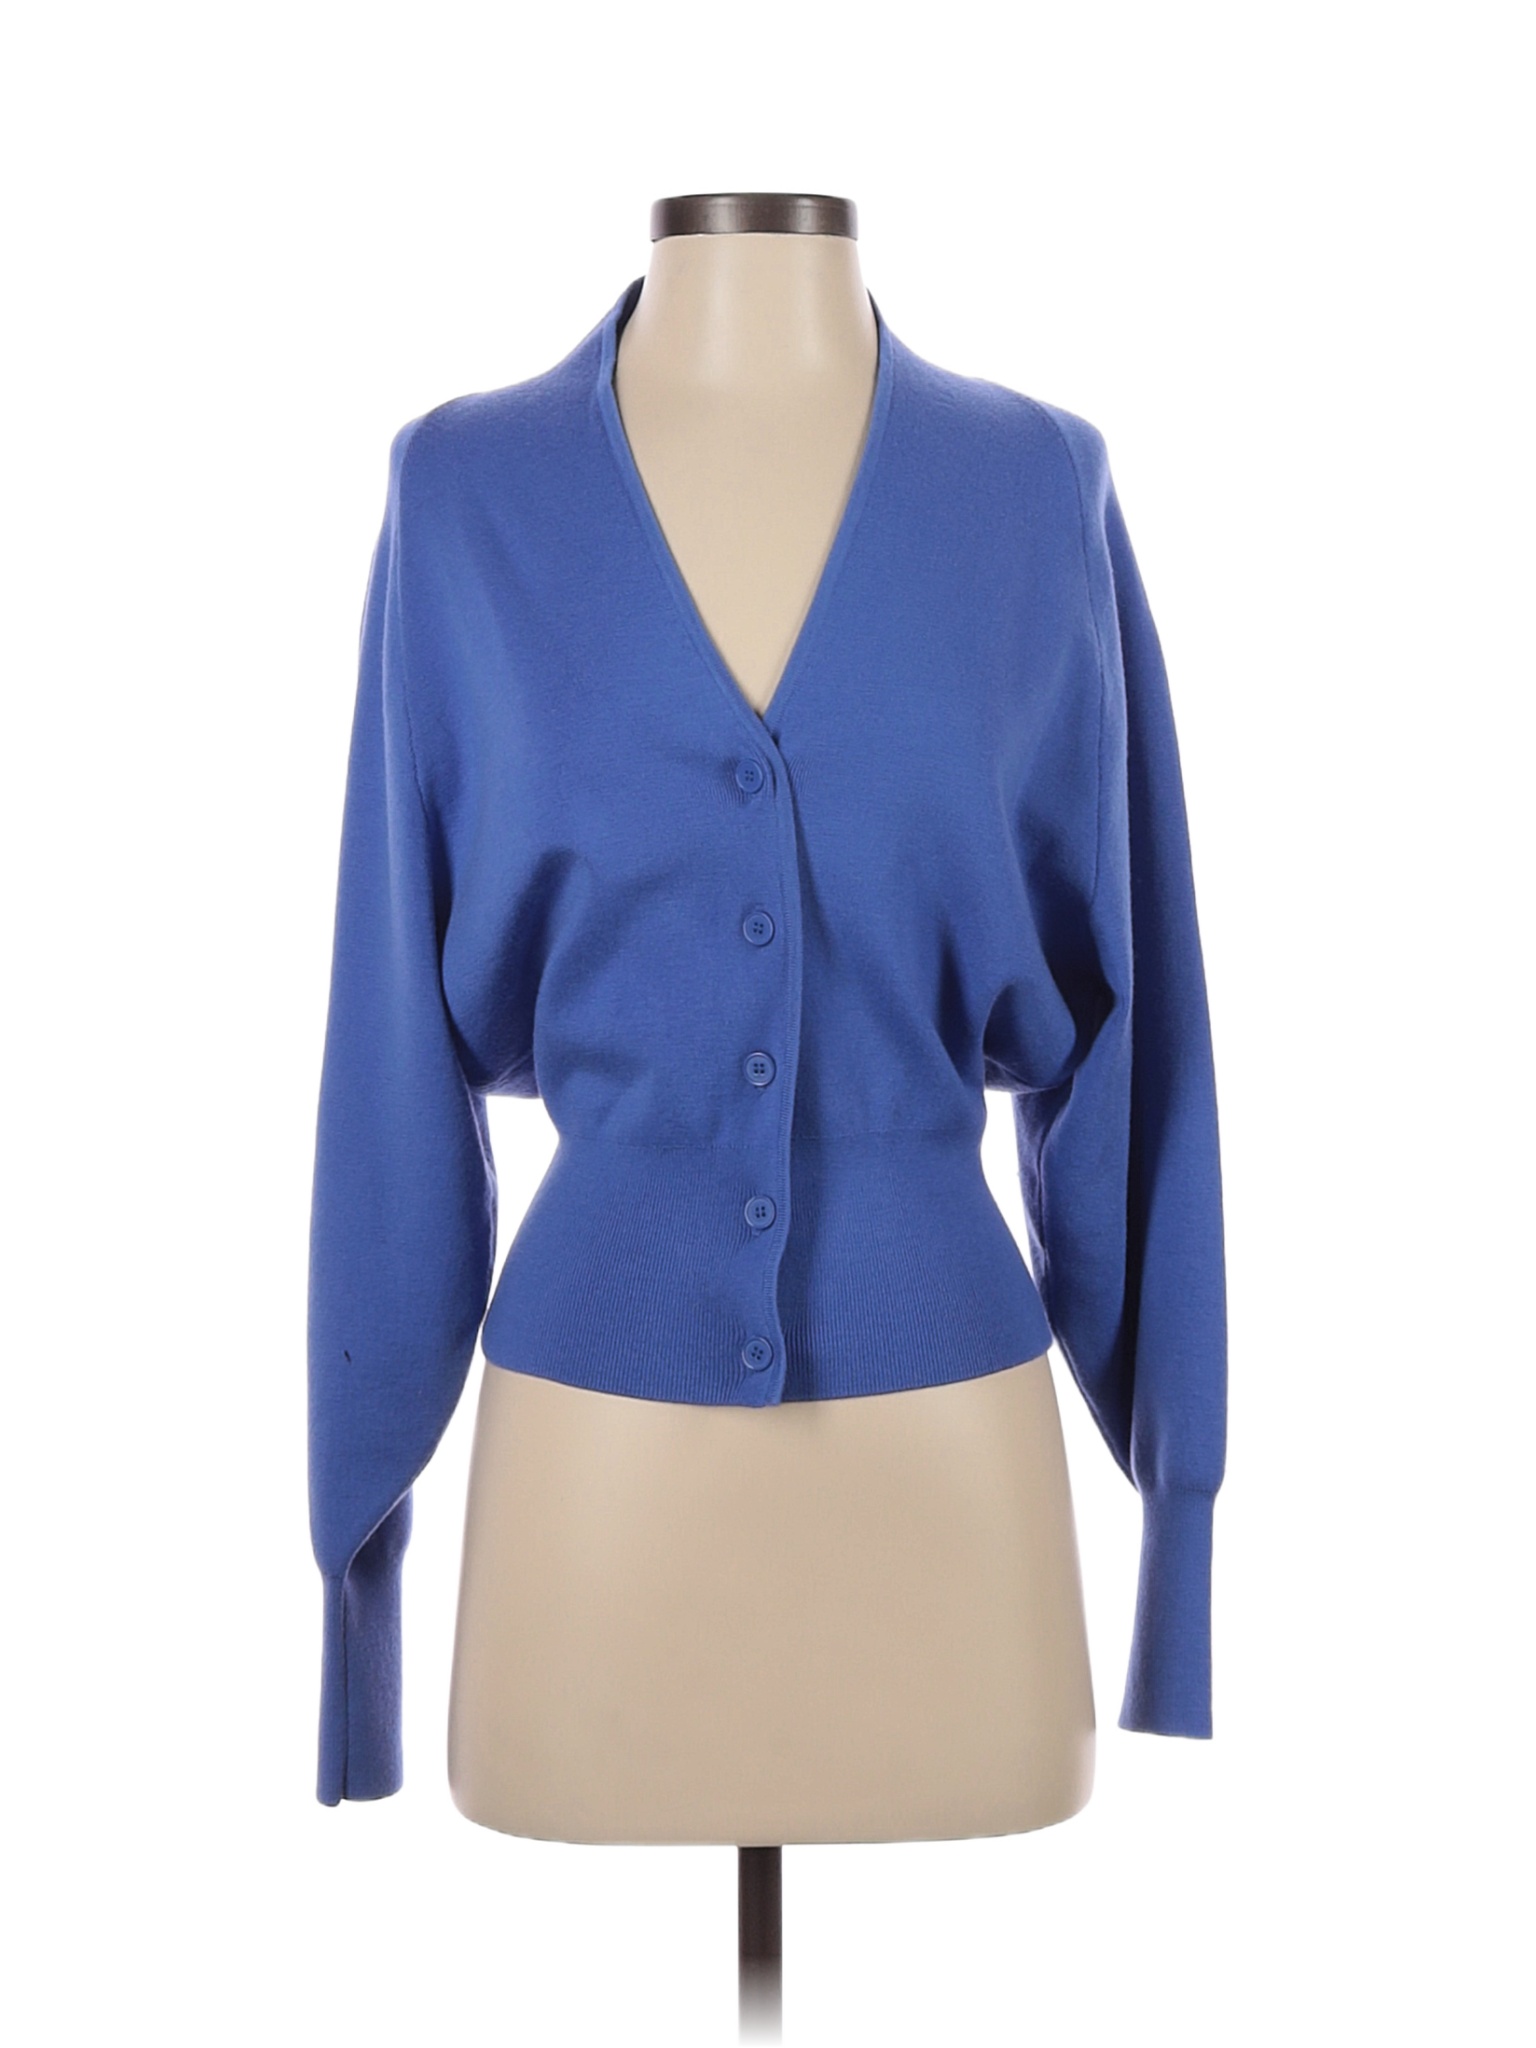 Cos Color Block Solid Blue Wool Cardigan Size XS - 78% off | thredUP